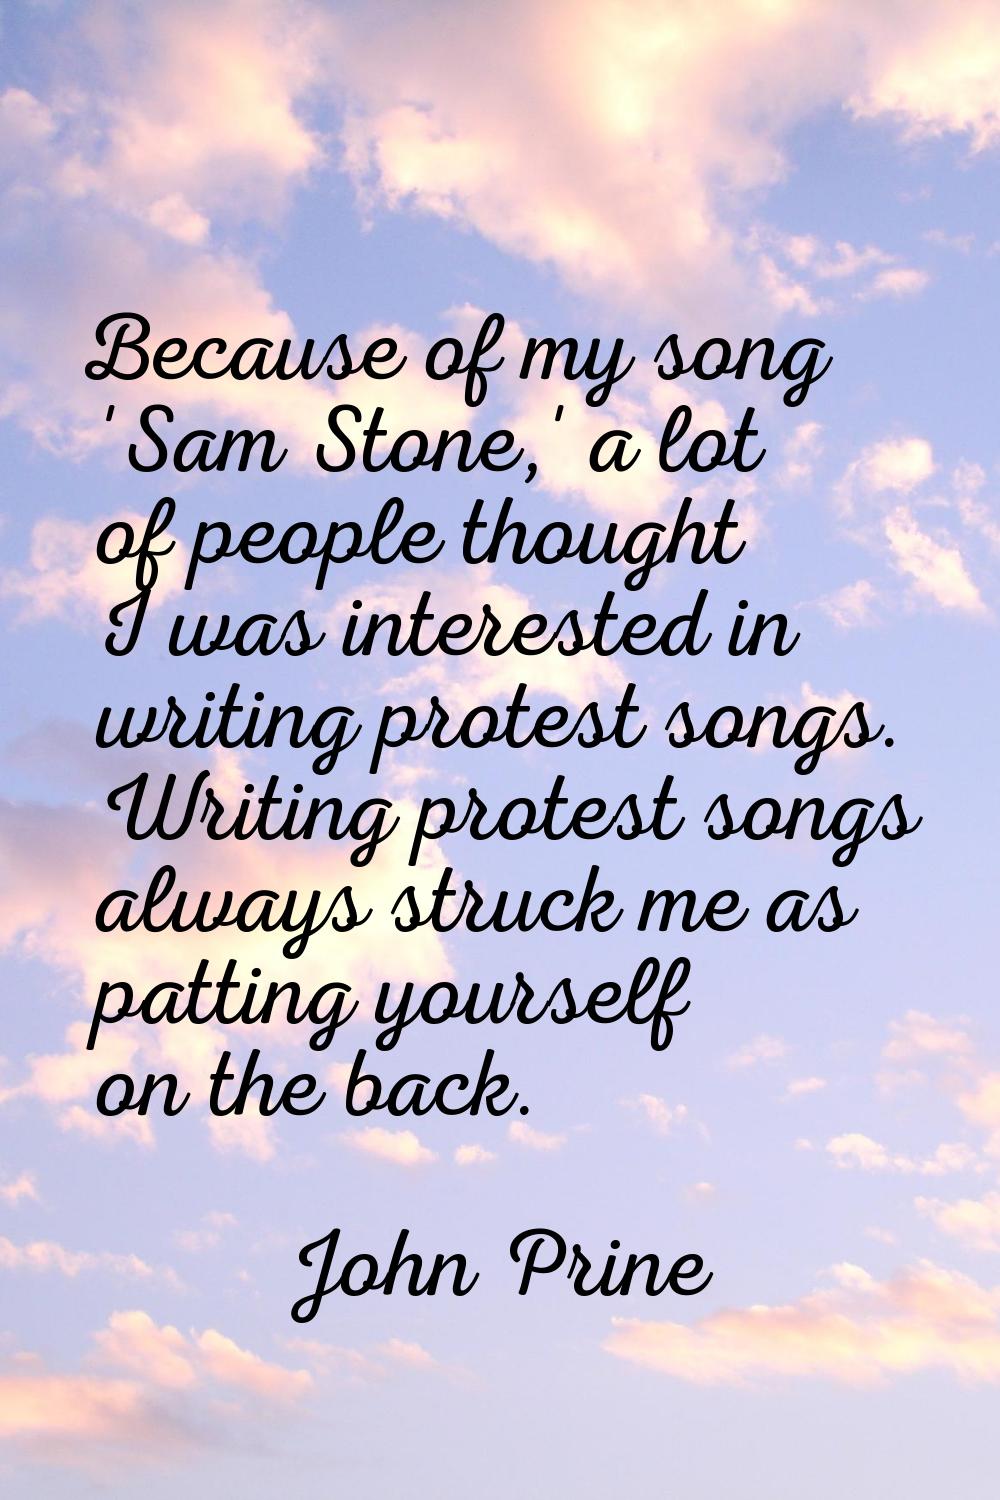 Because of my song 'Sam Stone,' a lot of people thought I was interested in writing protest songs. 